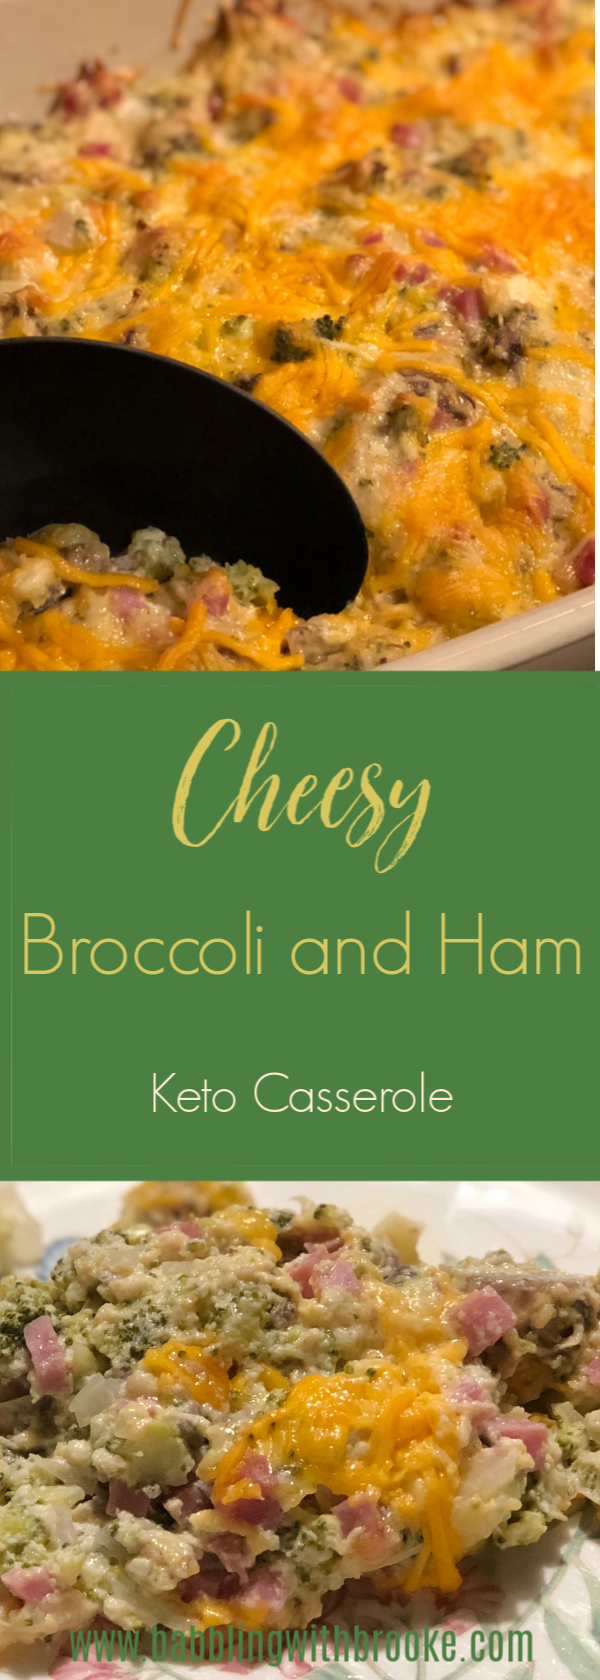 This keto casserole is the ultimate keto comfort casserole! Cheesy, gooey and yummy plus easy to make too! #ketocasserole #cheesycasserole #easydinnerrecipe #casserolerecipe